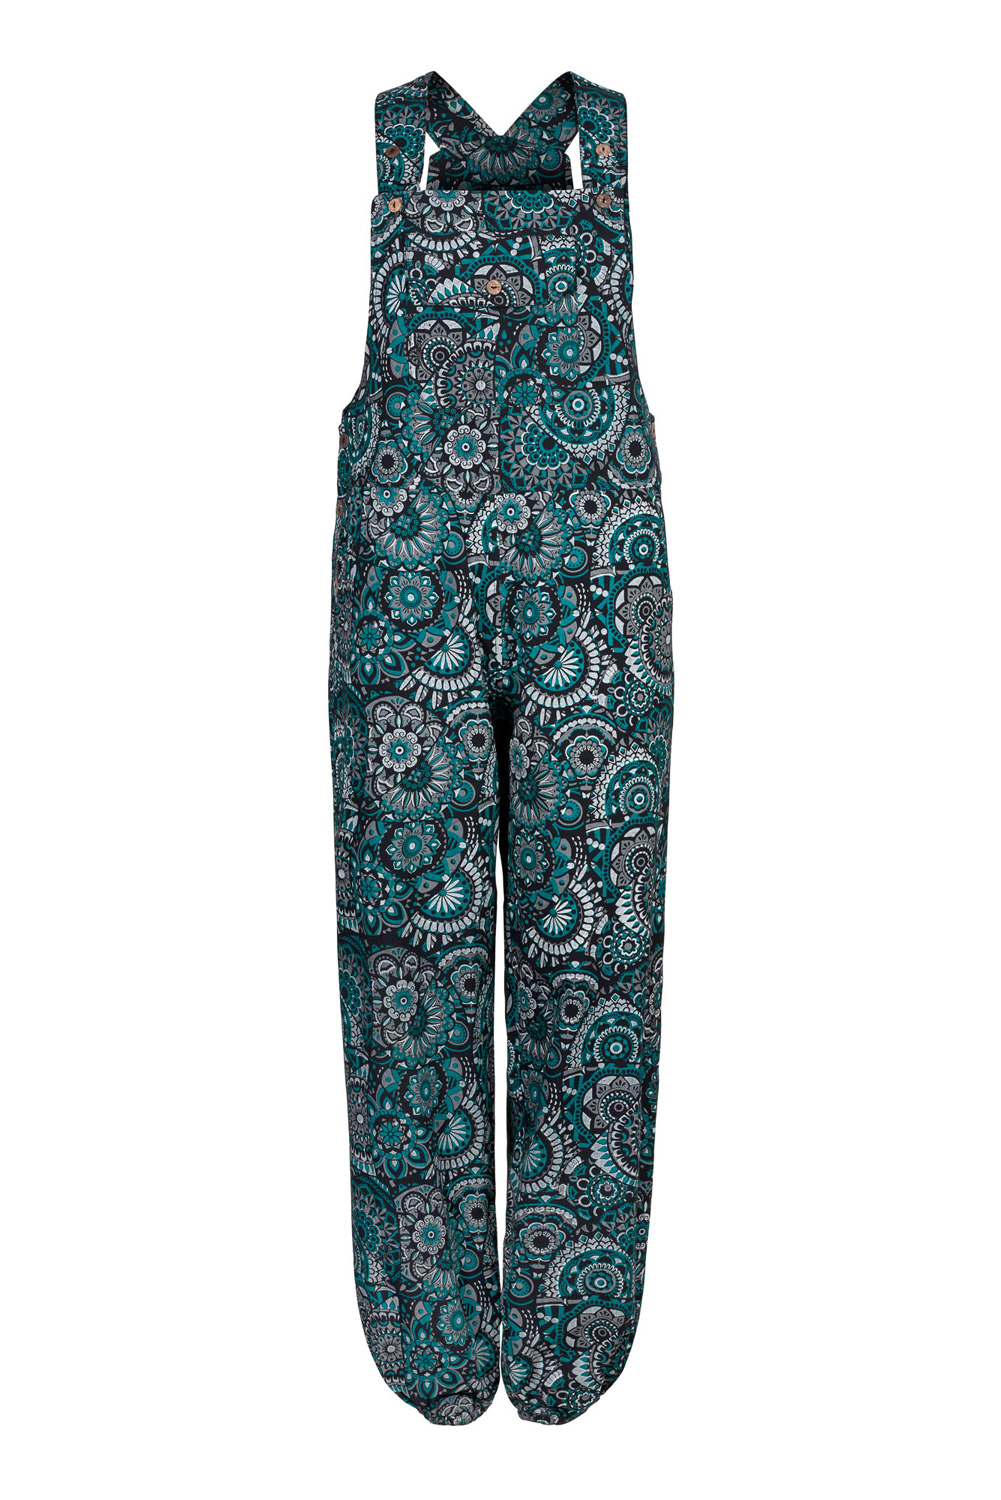 Wicked Dragon Clothing - Funky print baggy dungarees